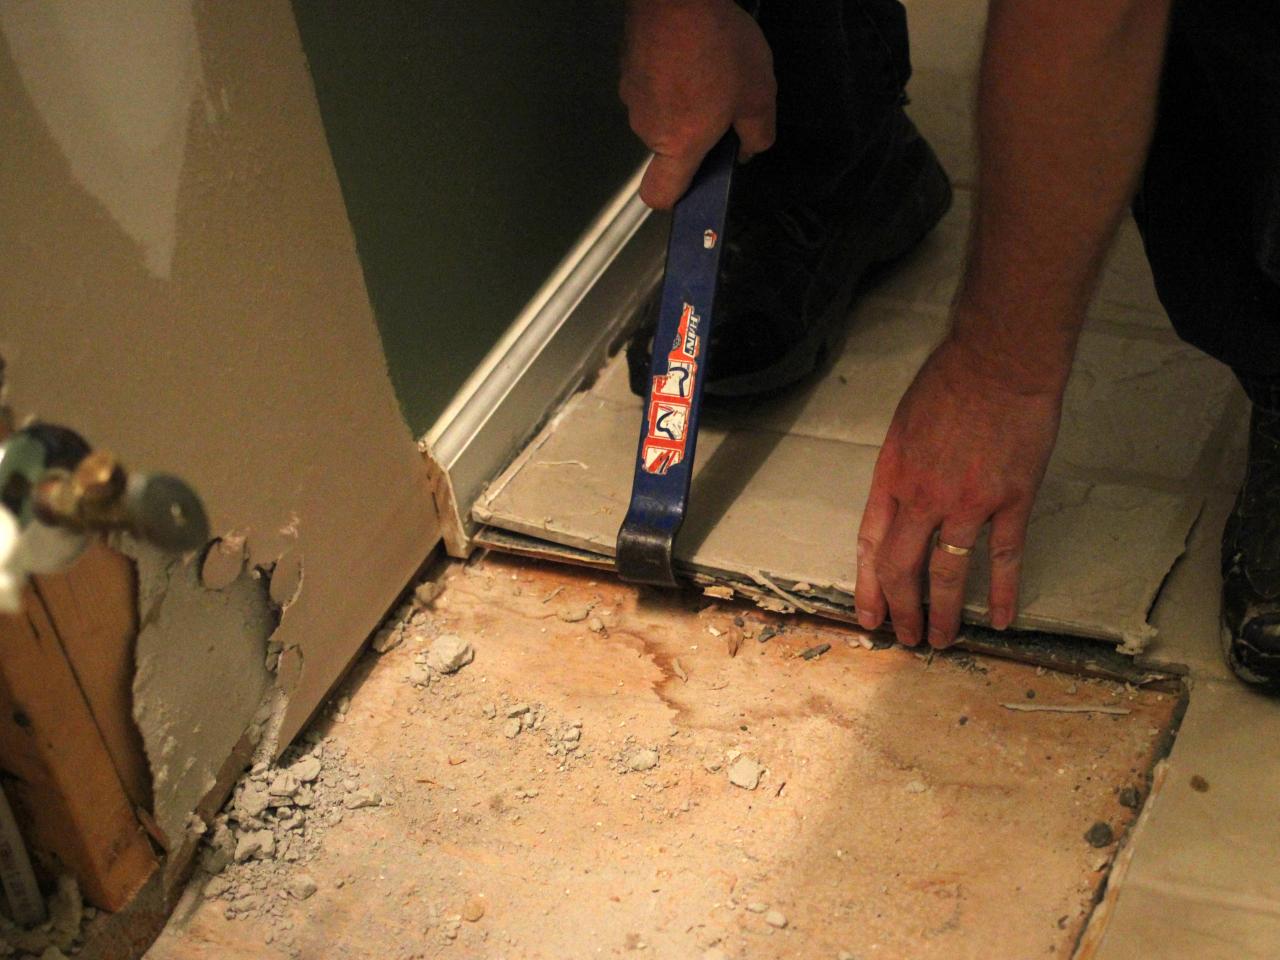 How To Remove A Tile Floor, How To Remove Ceramic Tile From Concrete Floor Without Breaking